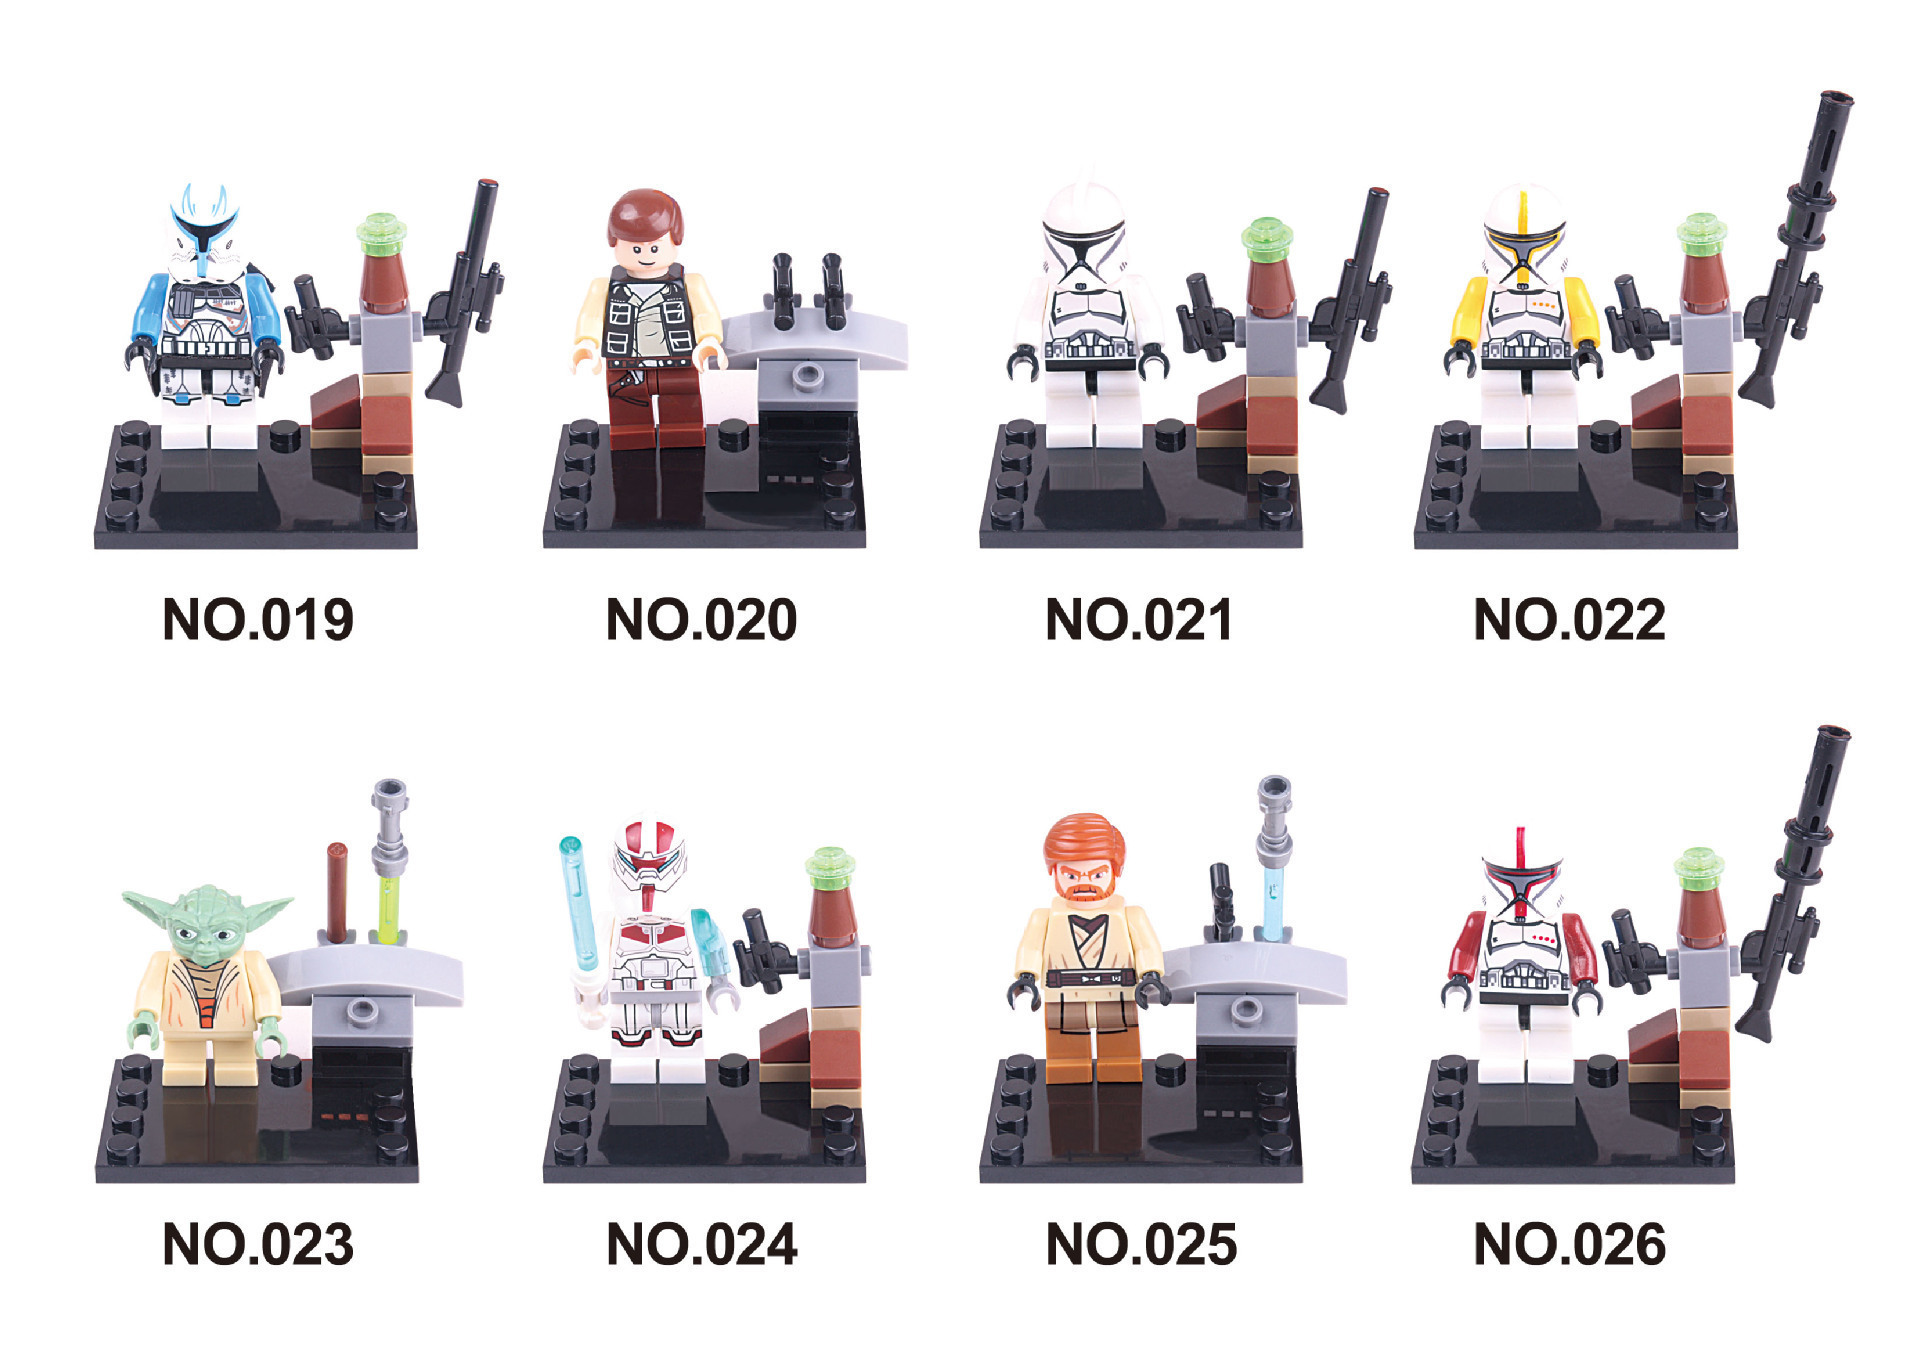 XH019 020 021 022 023 024 025 026 140 011 056 190 Star Wars Mini Building Blocks Bricks Action Figures Educational Toys For Children's Gifts